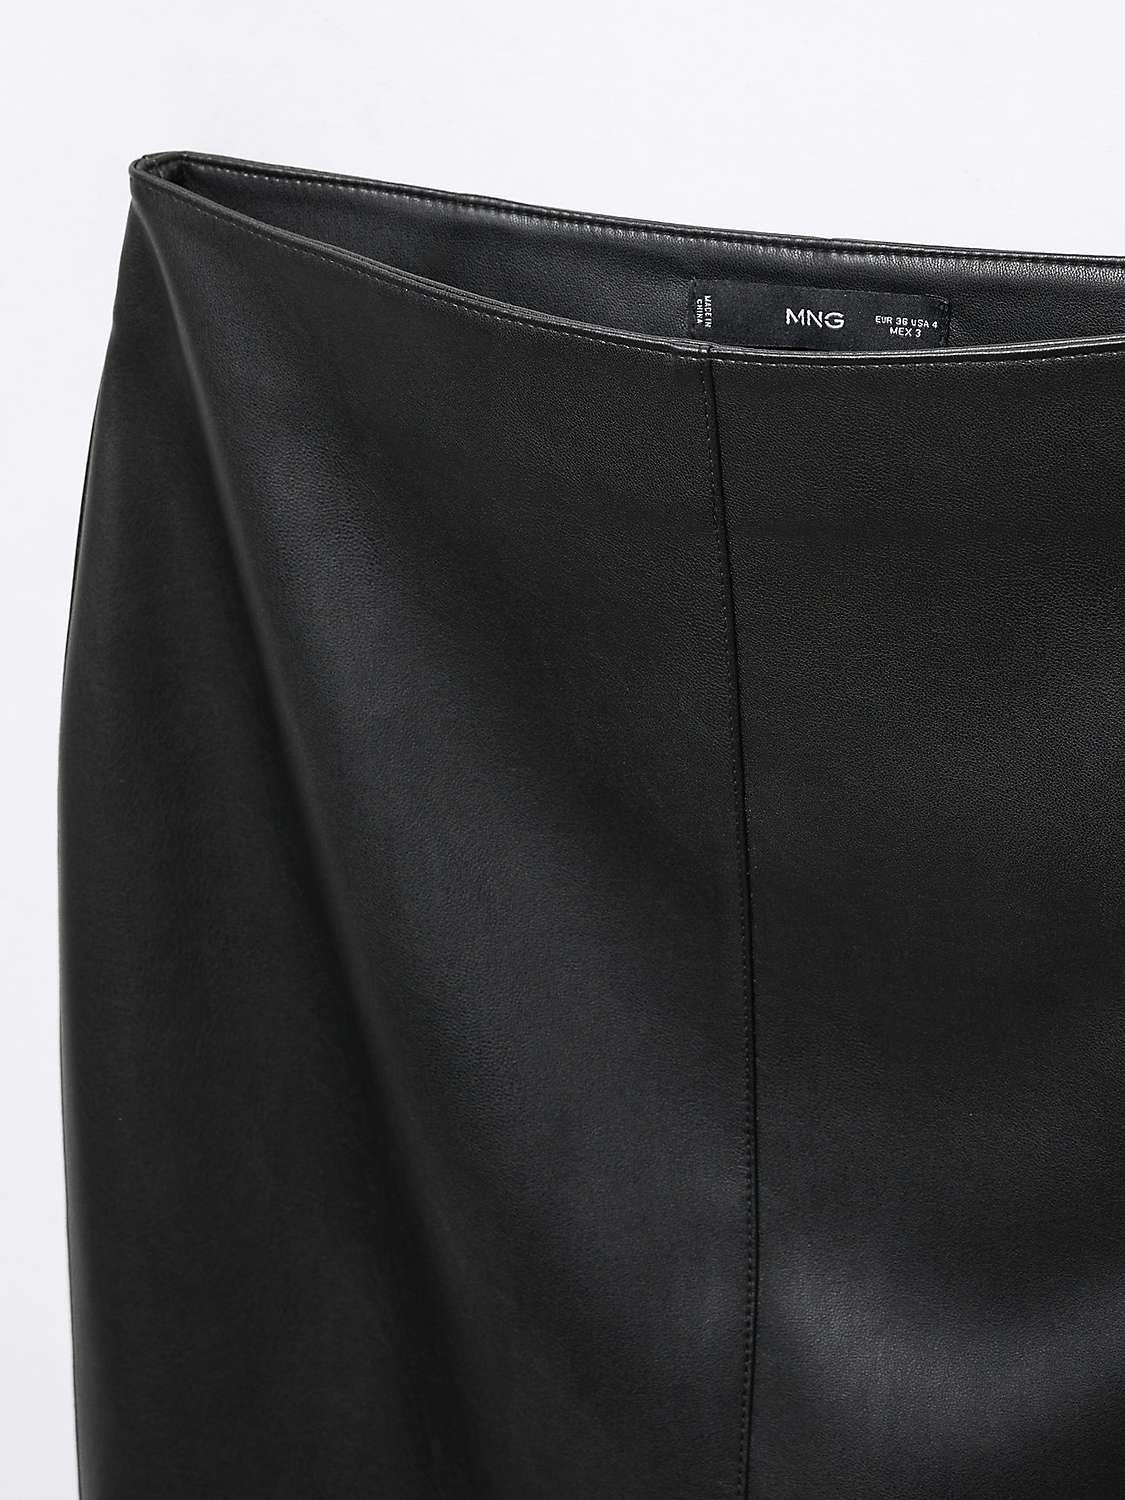 Buy Mango Faux Leather Pencil Skirt Online at johnlewis.com